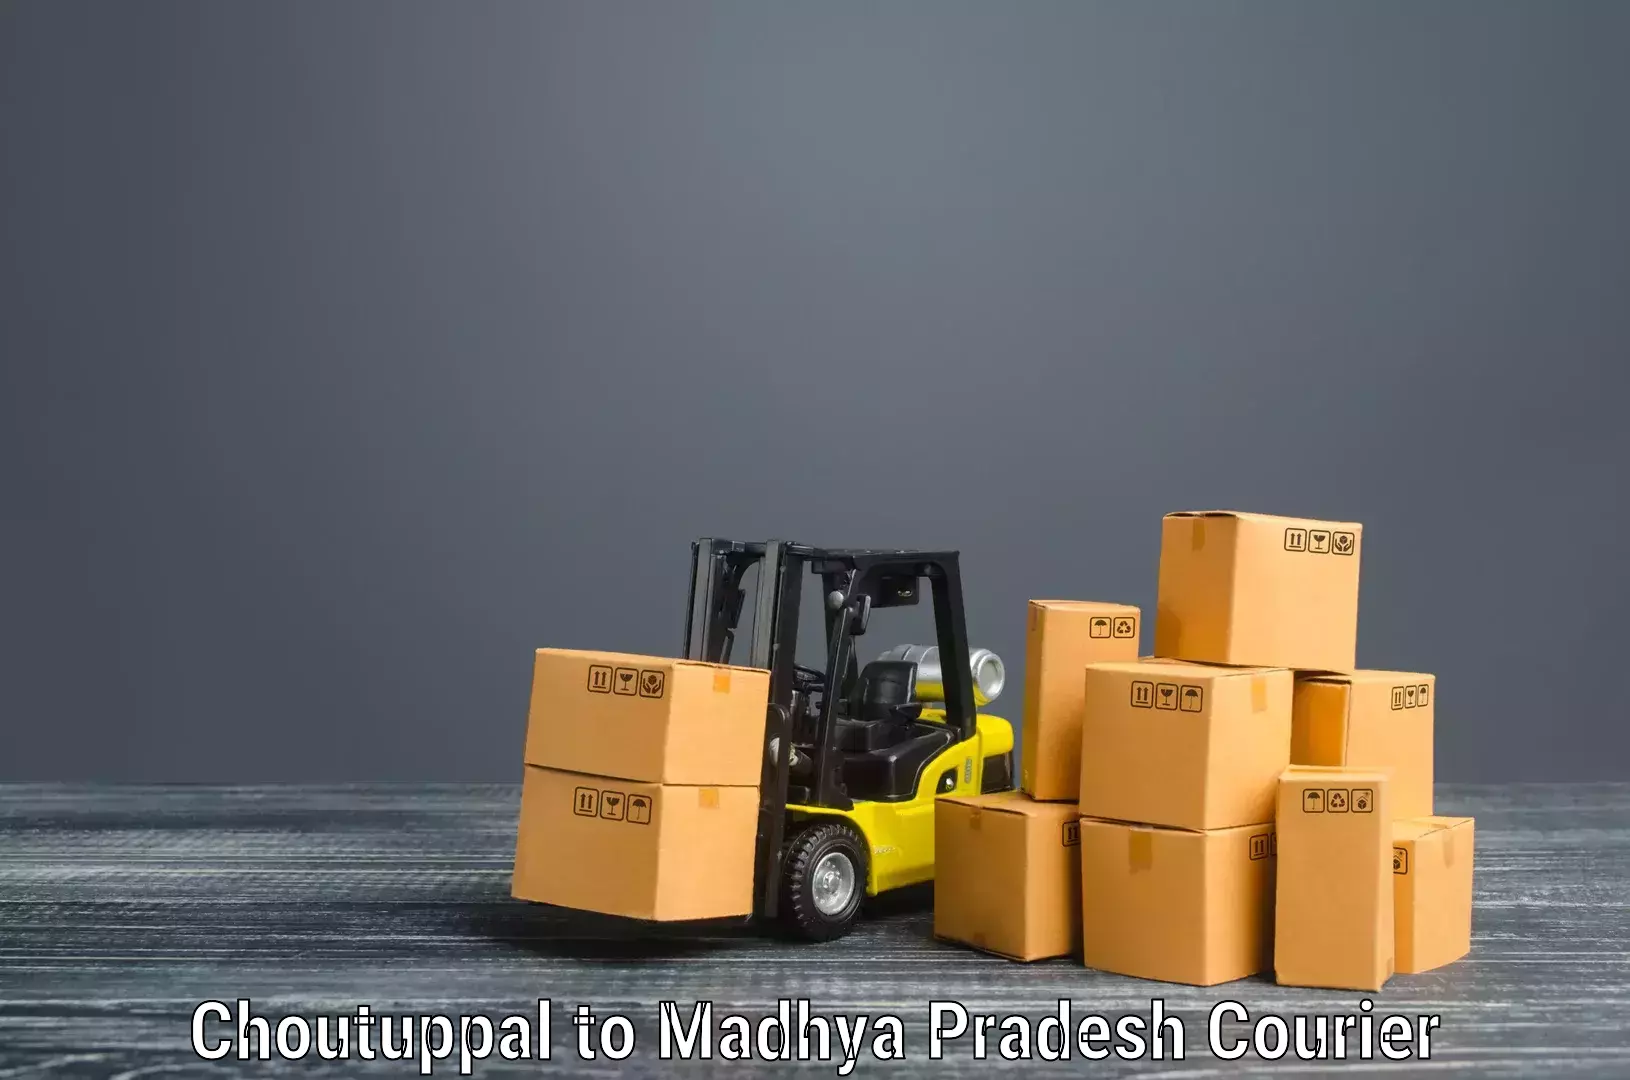 Home moving experts Choutuppal to Bhopal